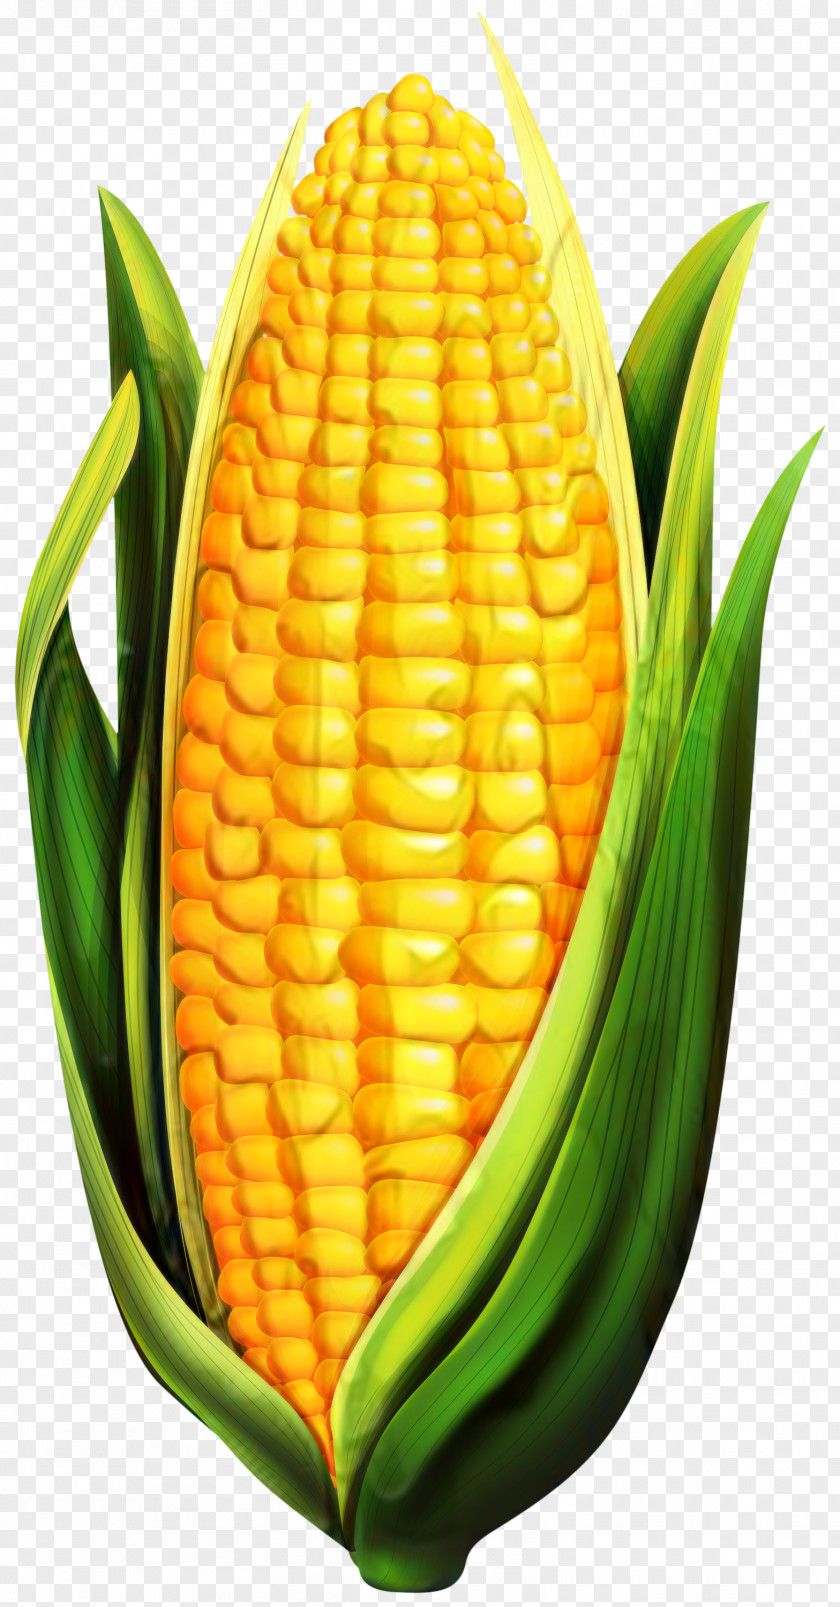 Corn On The Cob Sweet Pineapple Commodity PNG